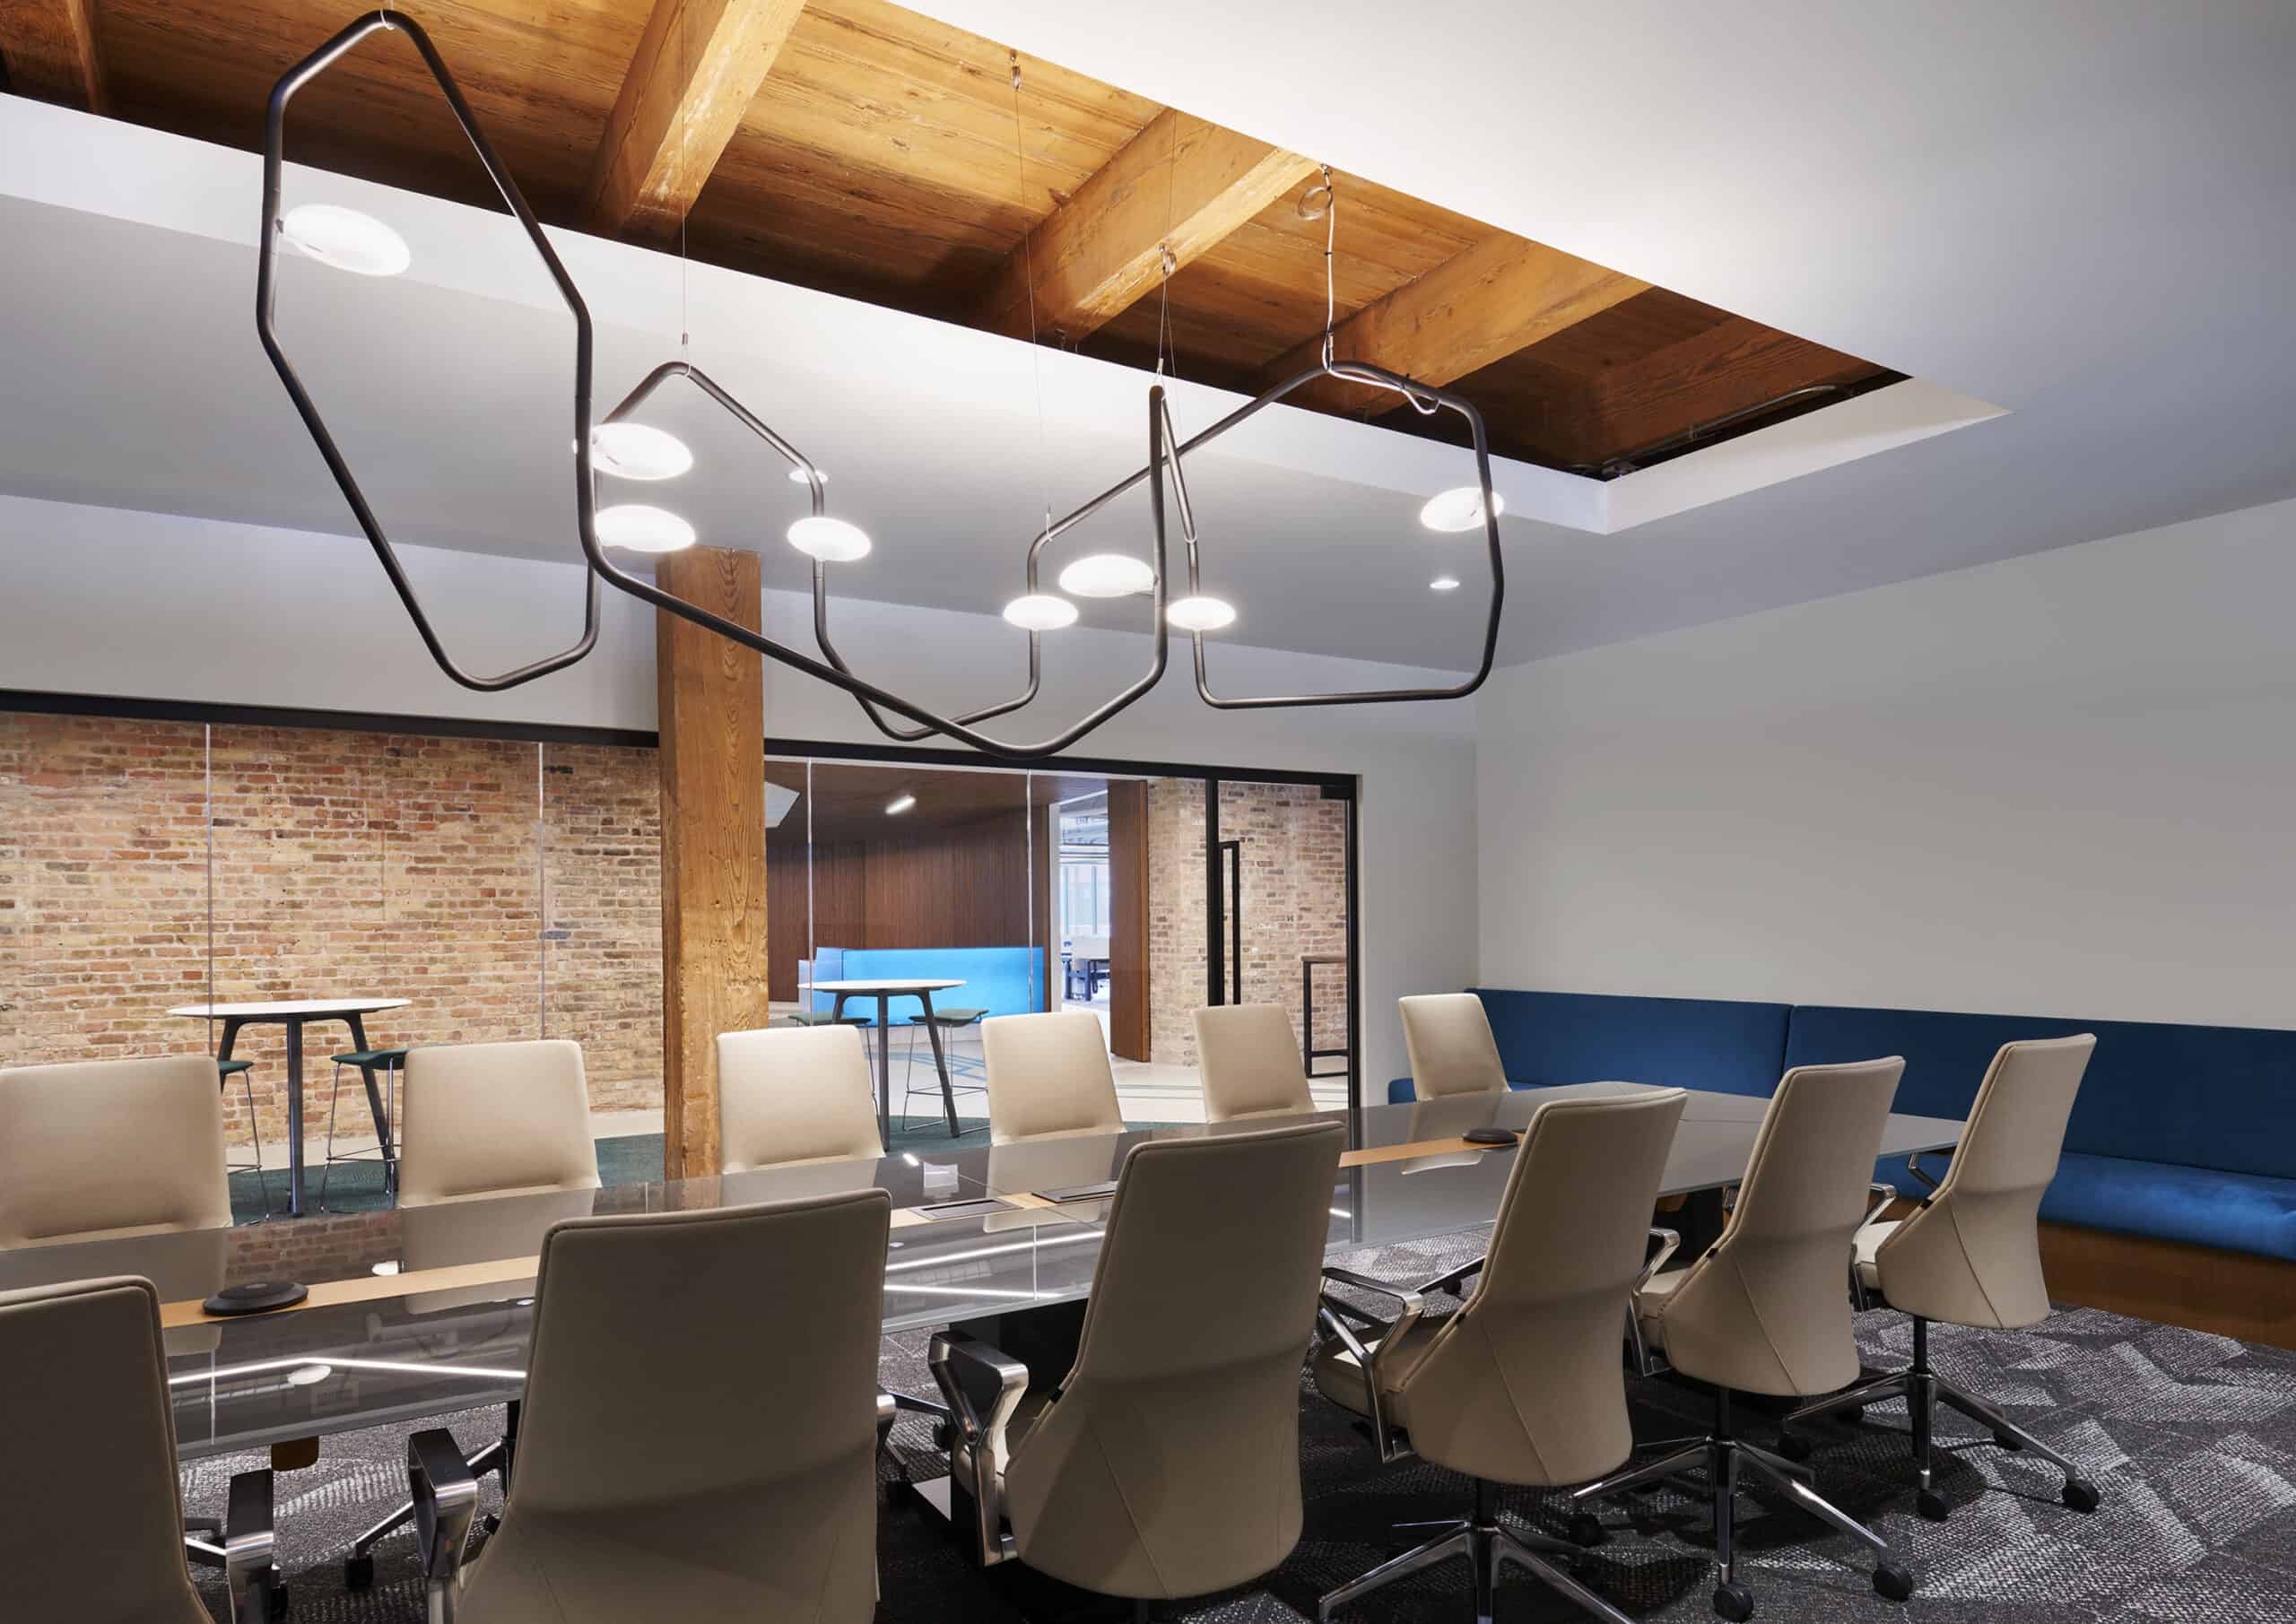 Large modern conference room designed by HK Architects with curved lighting fixture and high back office chairs. 